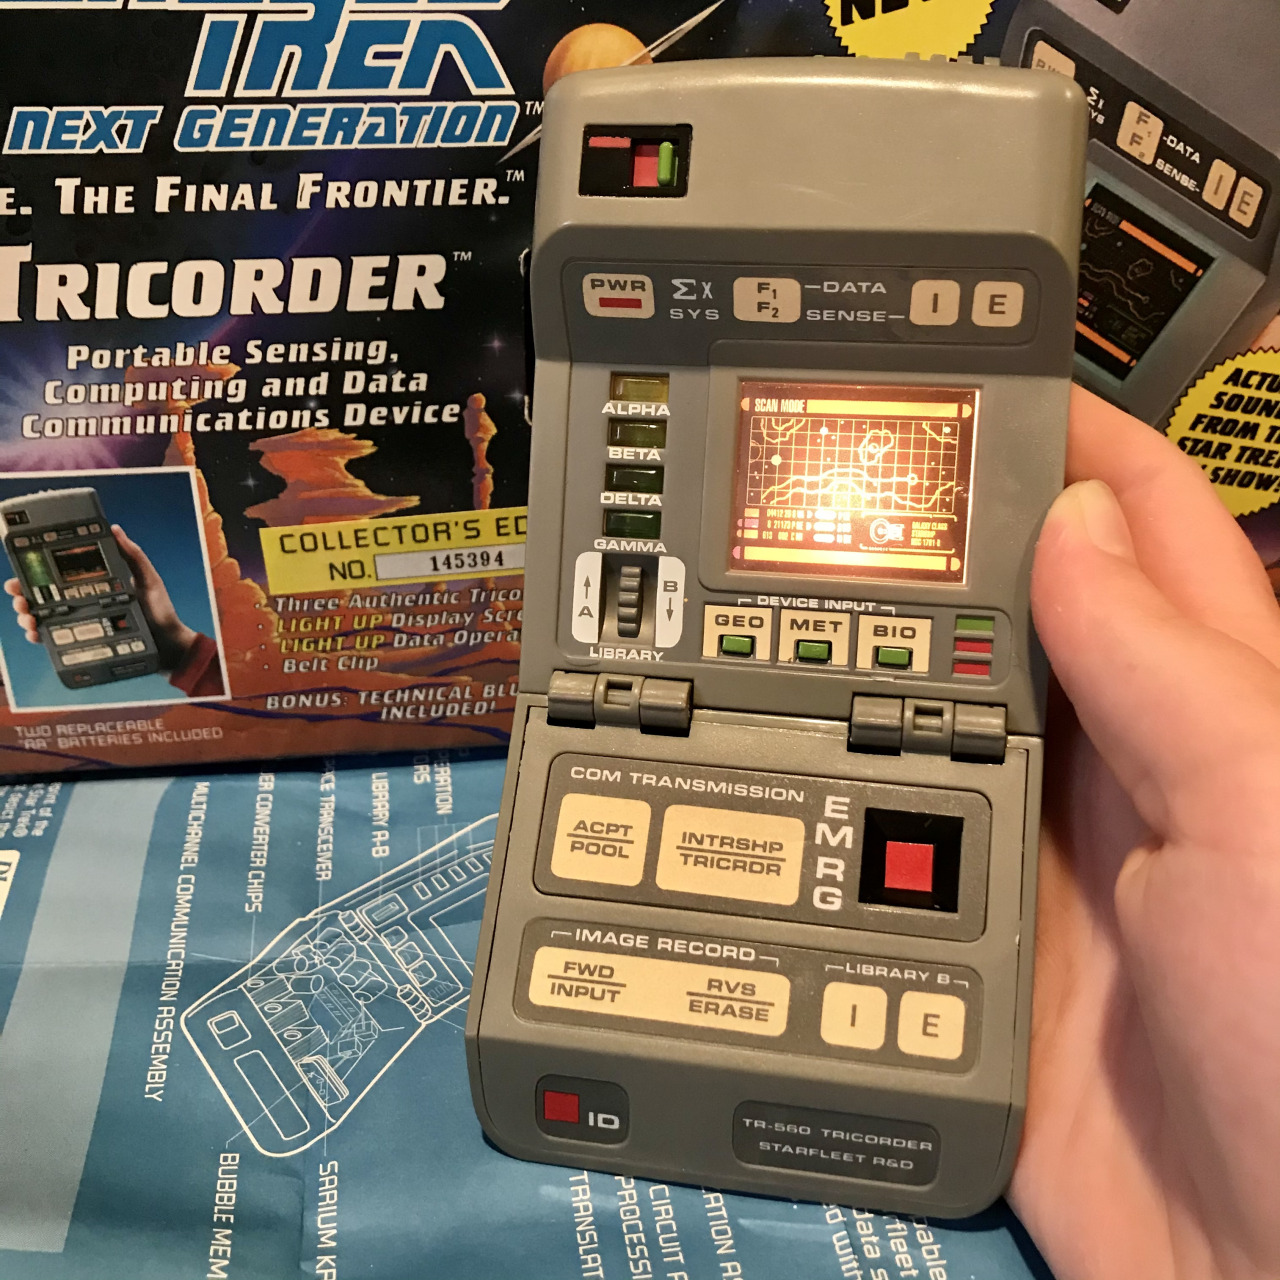 Playmates Star Trek The Next Generation Tricorder 1993 #NICEEEEEEEE #YEAH BABY WOOOOOO!!!!  #i found this at the second hand store  #still in the box never opened baby  #payed a little more then i usually would on trek stuff but i was so excited  #and also i checked online after and i actually got a fair deal  #paid a lootttt less then some people are askin for on ebay  #i LOVE the next gen tricorders they are so fucking satisfying  #i actually like them more then the TOS version  #god im so glad i found this  #my brother was like  #........ why  #also i had to use his money to buy it cuz i didnt have any on me #lol #they also had a pretty sick spock doll  #and a worf one  #but they put them in the case and i was too shy to get one of the workers  #to let me inspect it  #shoudl i go back tomorrow and look at the spock doll they had ?  #i think maybe someone had this baby one hold or they hadnt set it out yet  #cuz it wast even on a shelf it was on one of their tables  #so if i nicked it from someone who had it one hold  #im not sorry  #this shit is sick  #oh man and the box art  #you guys should hear the little beeep beeeeps it makes #star trek#90s#aesthetic#thrifting